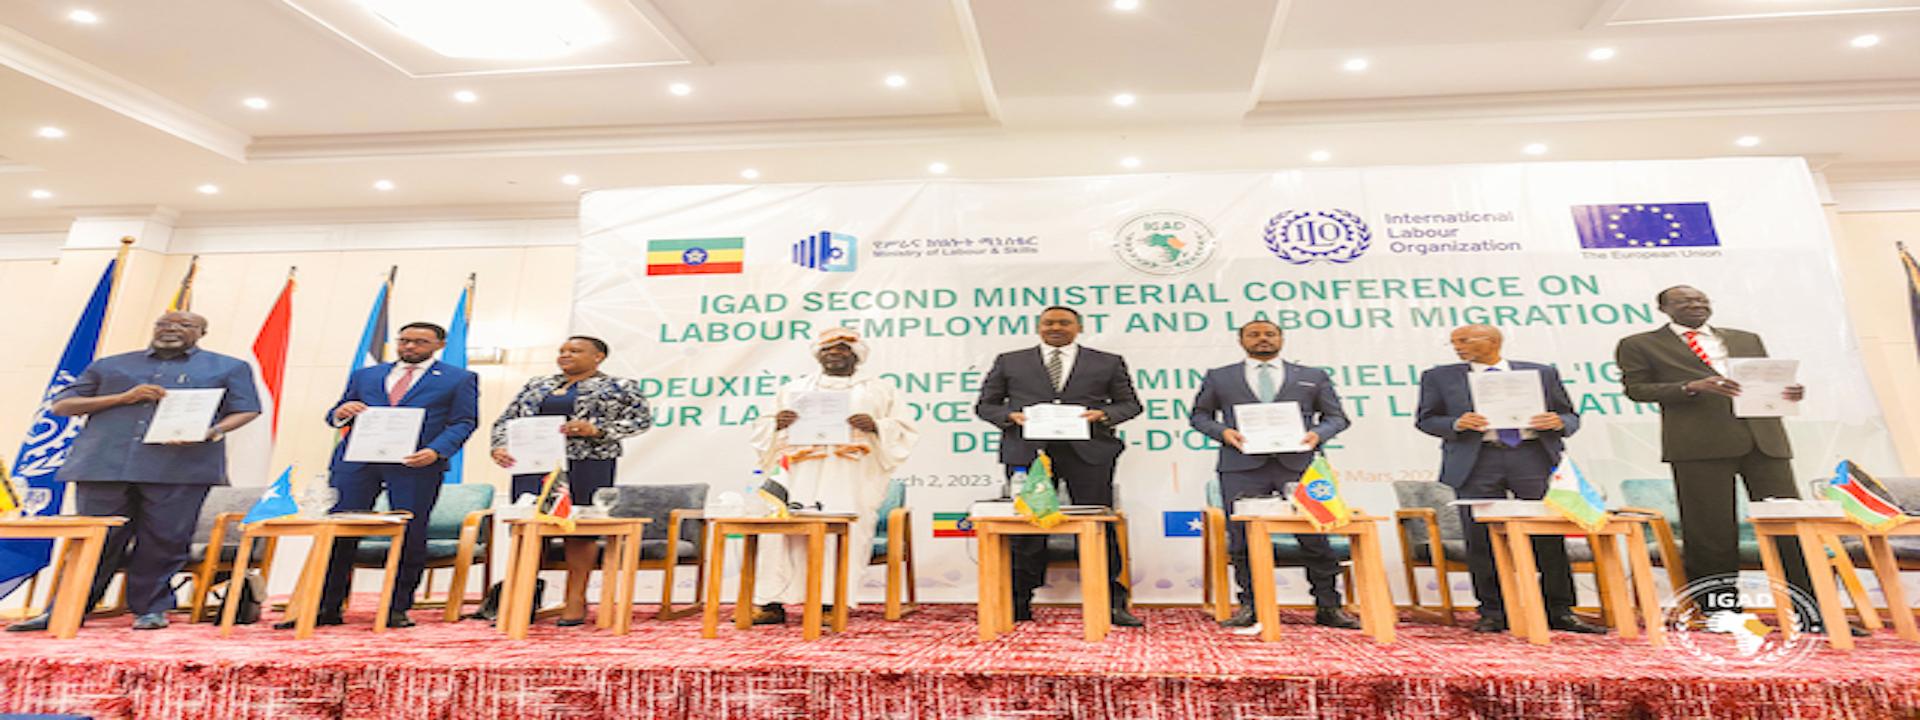 IGAD Ministers of Labour at the 2nd IGAD Ministerial Conference on Labour, Employment and Labour Migrations